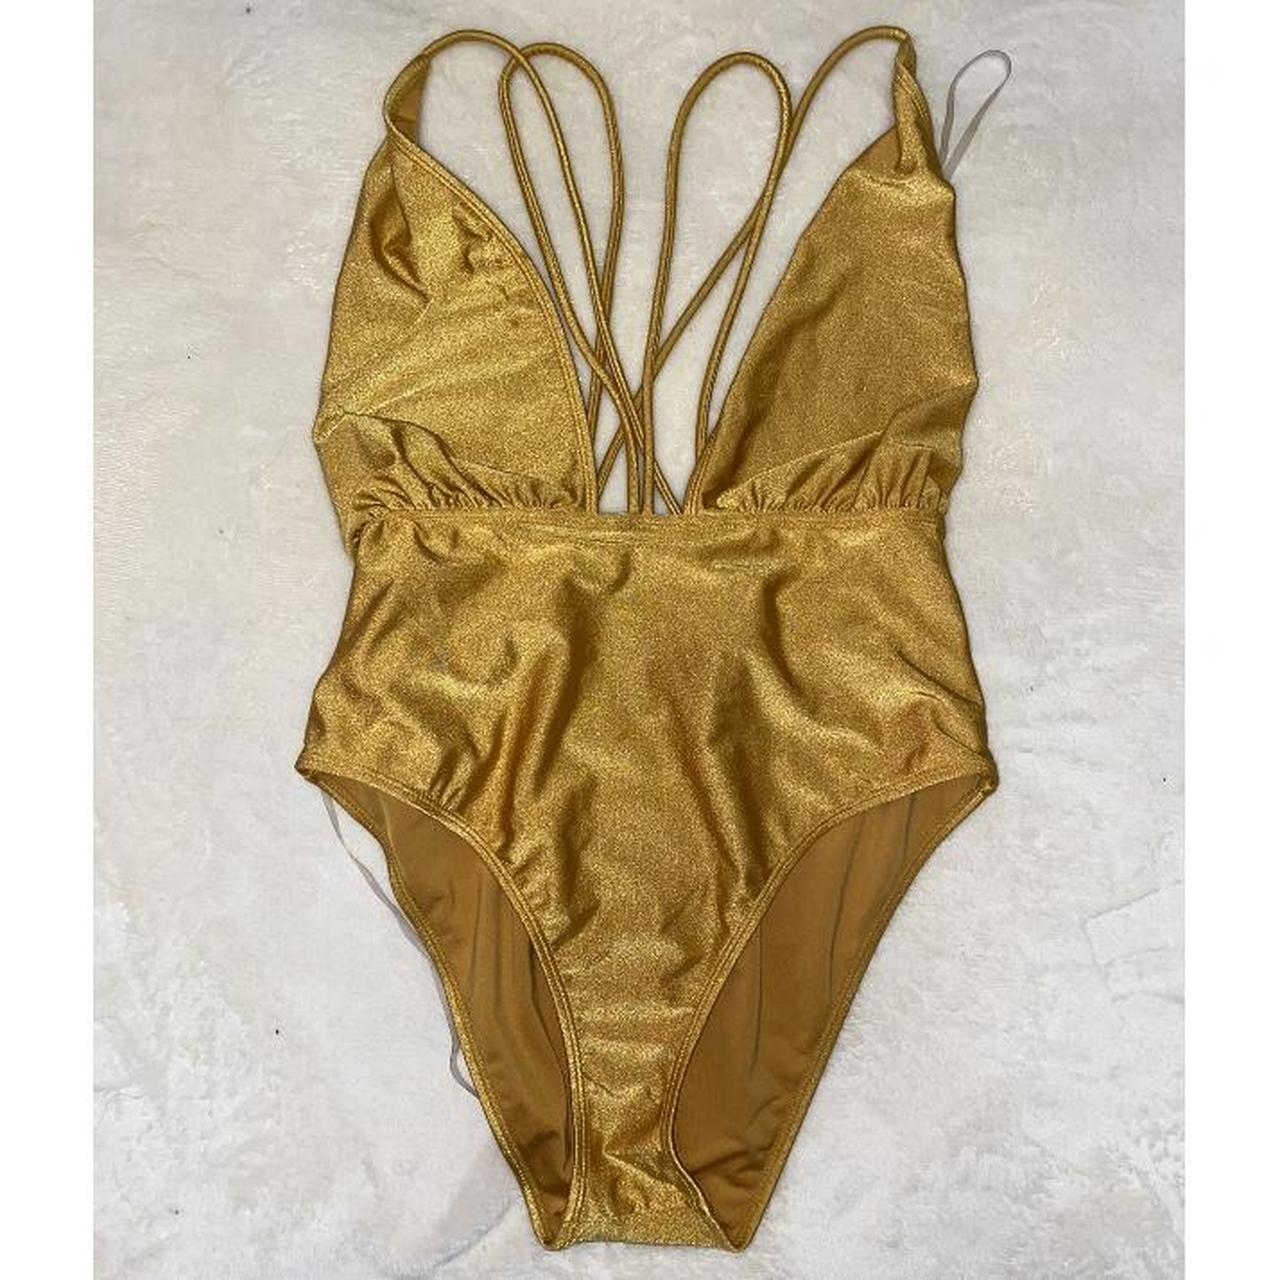 FOREVER 21 GOLD ONE PIECE SWIMSUIT 🏖️ gold stringy... - Depop